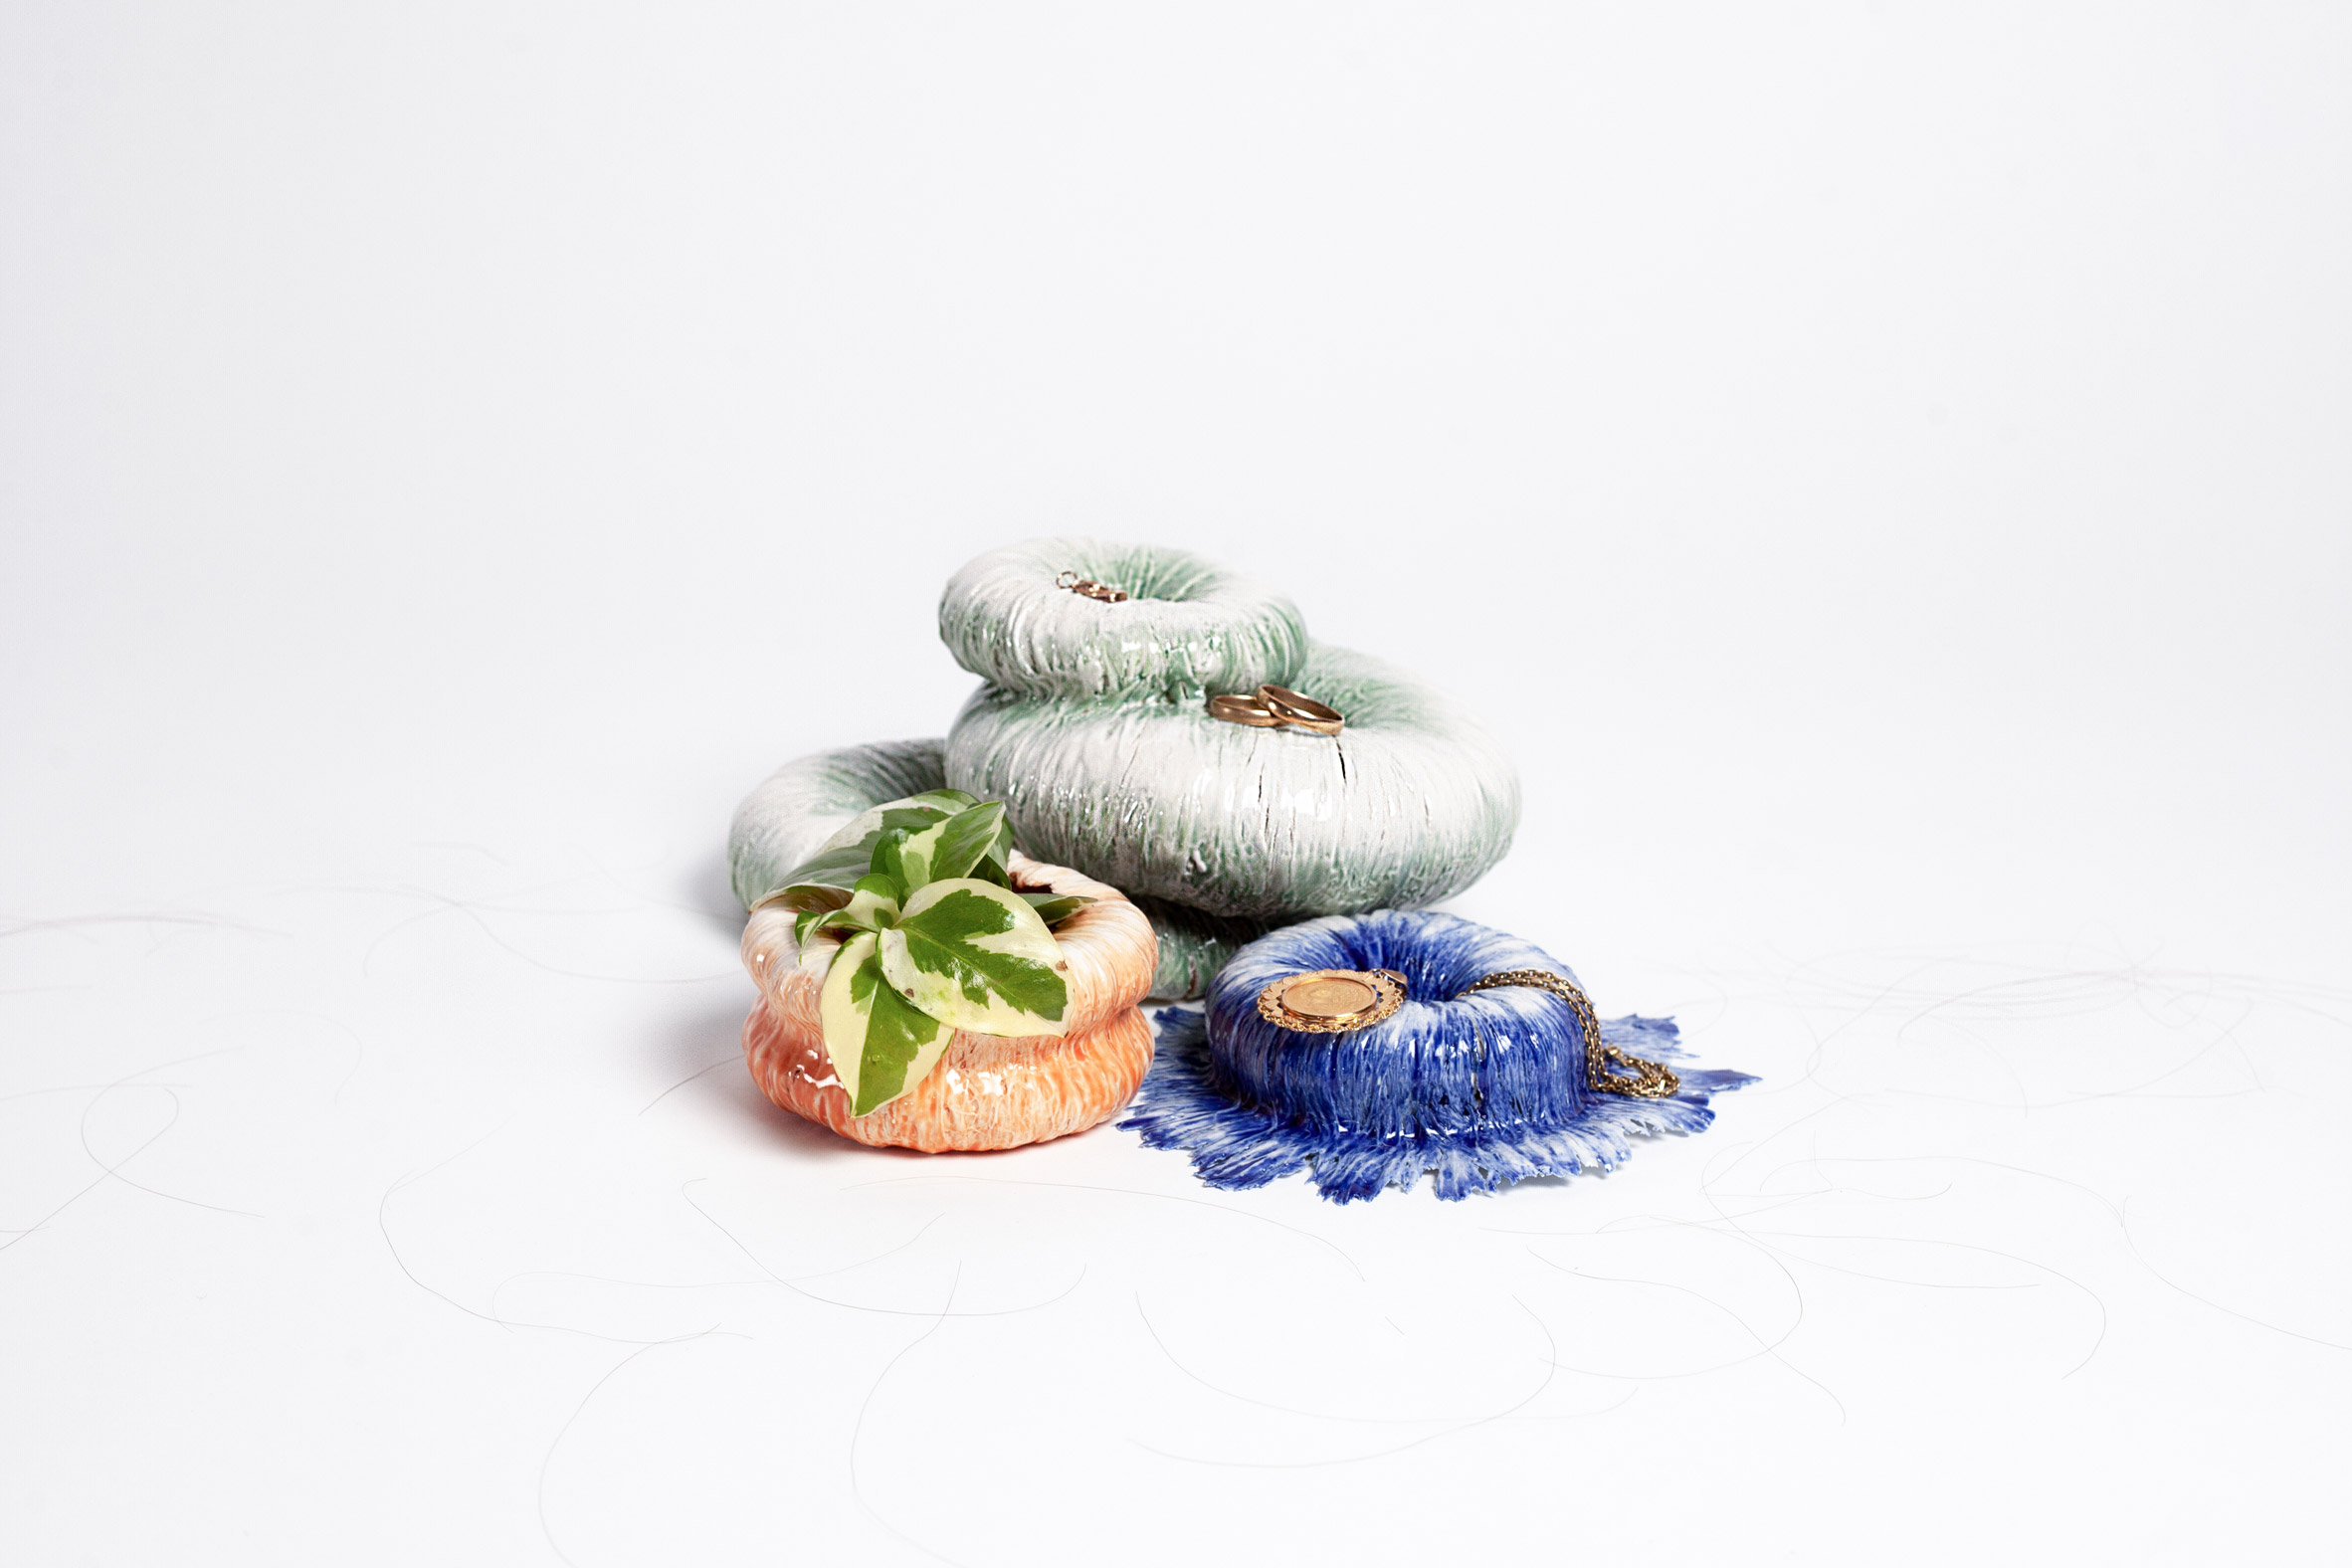 Céline Arnould makes commemorative porcelain bowls from the hair of loved ones